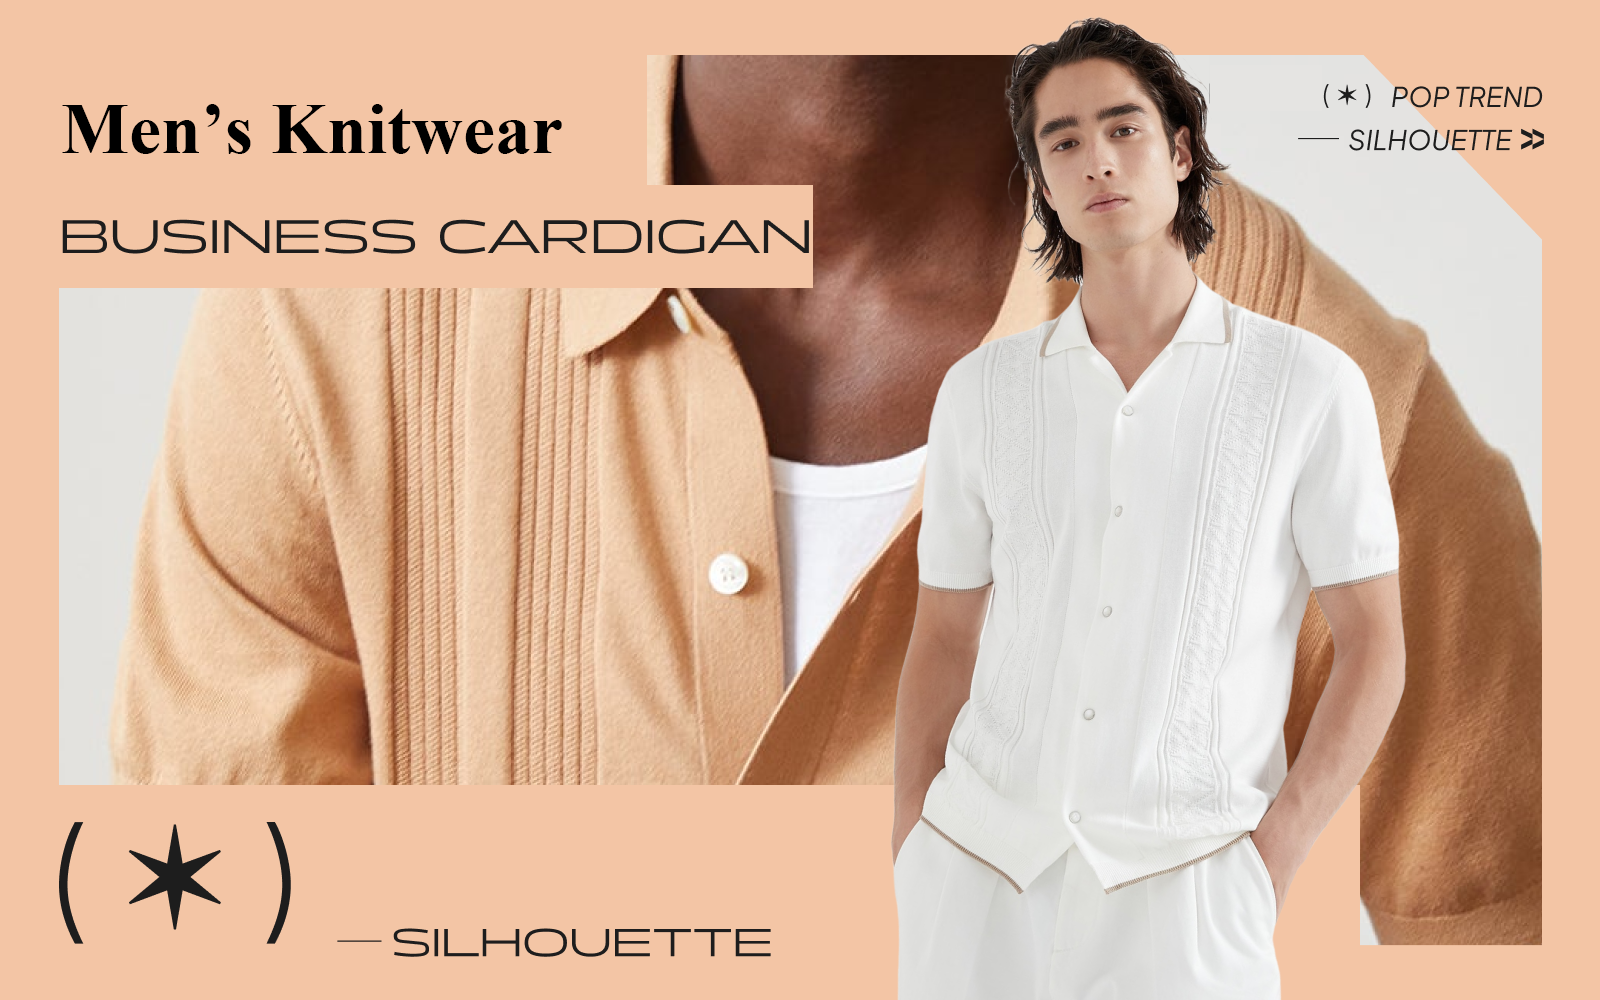 Business Cardigan -- The Silhouette Trend for Men's Knitwear